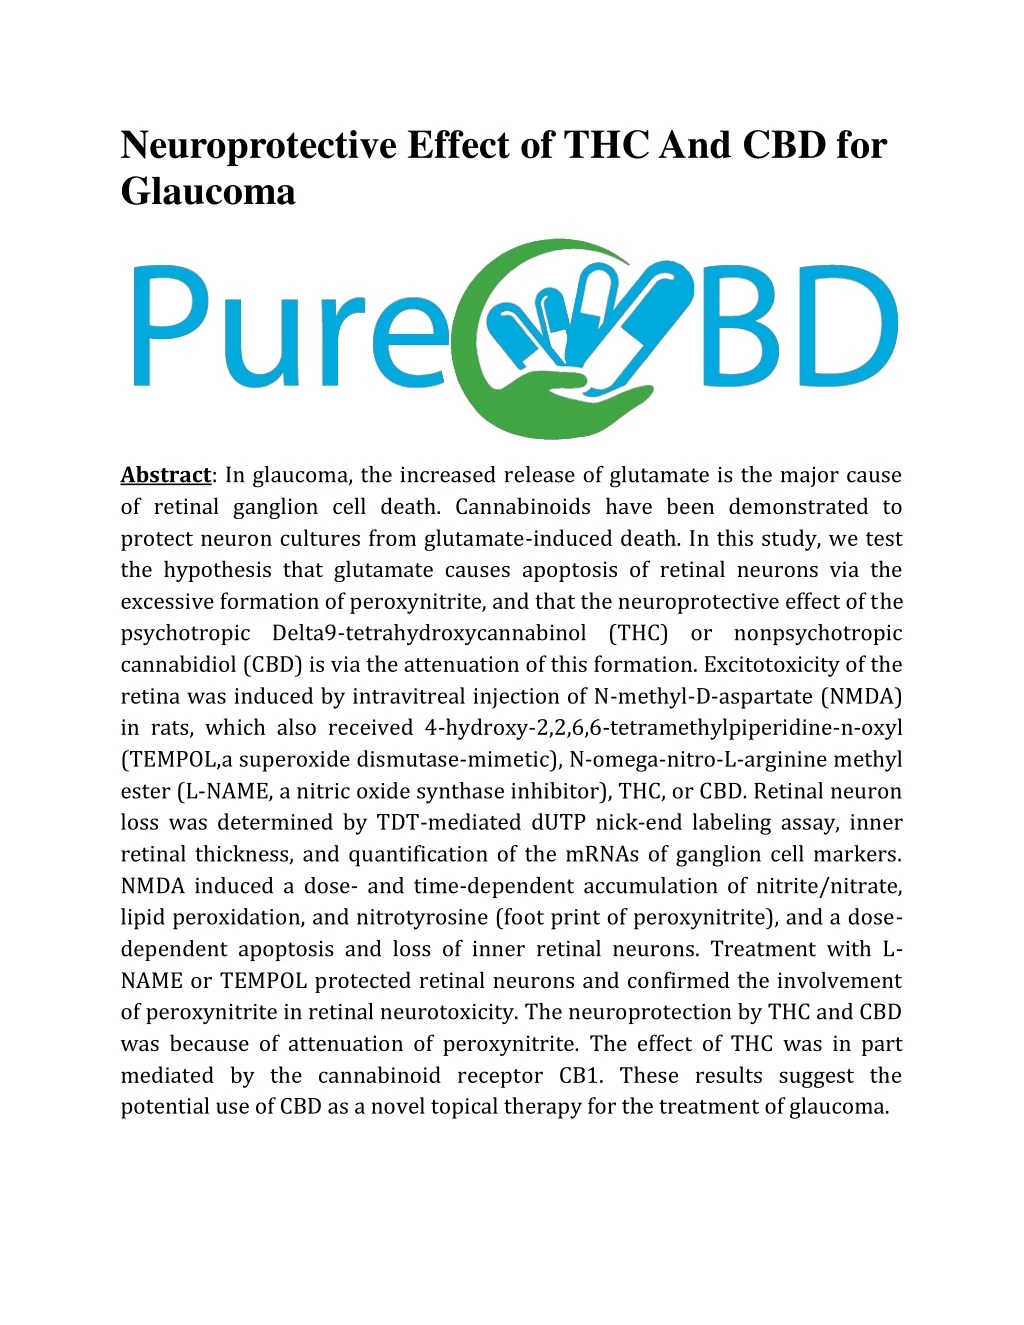 neuroprotective effect of thc and cbd for glaucoma